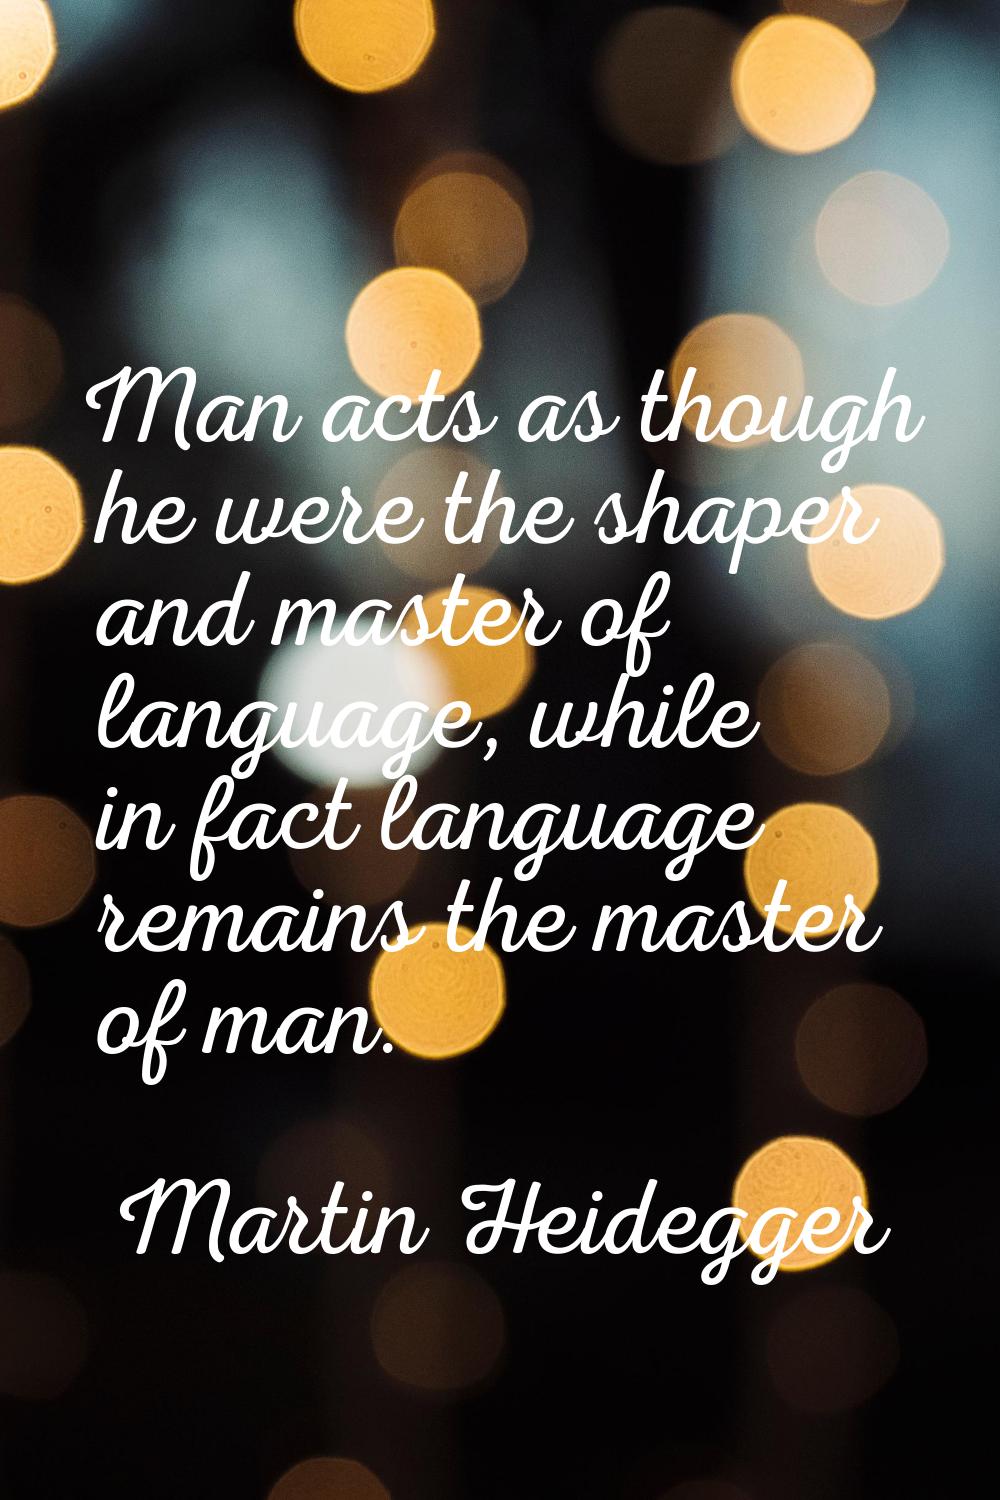 Man acts as though he were the shaper and master of language, while in fact language remains the ma